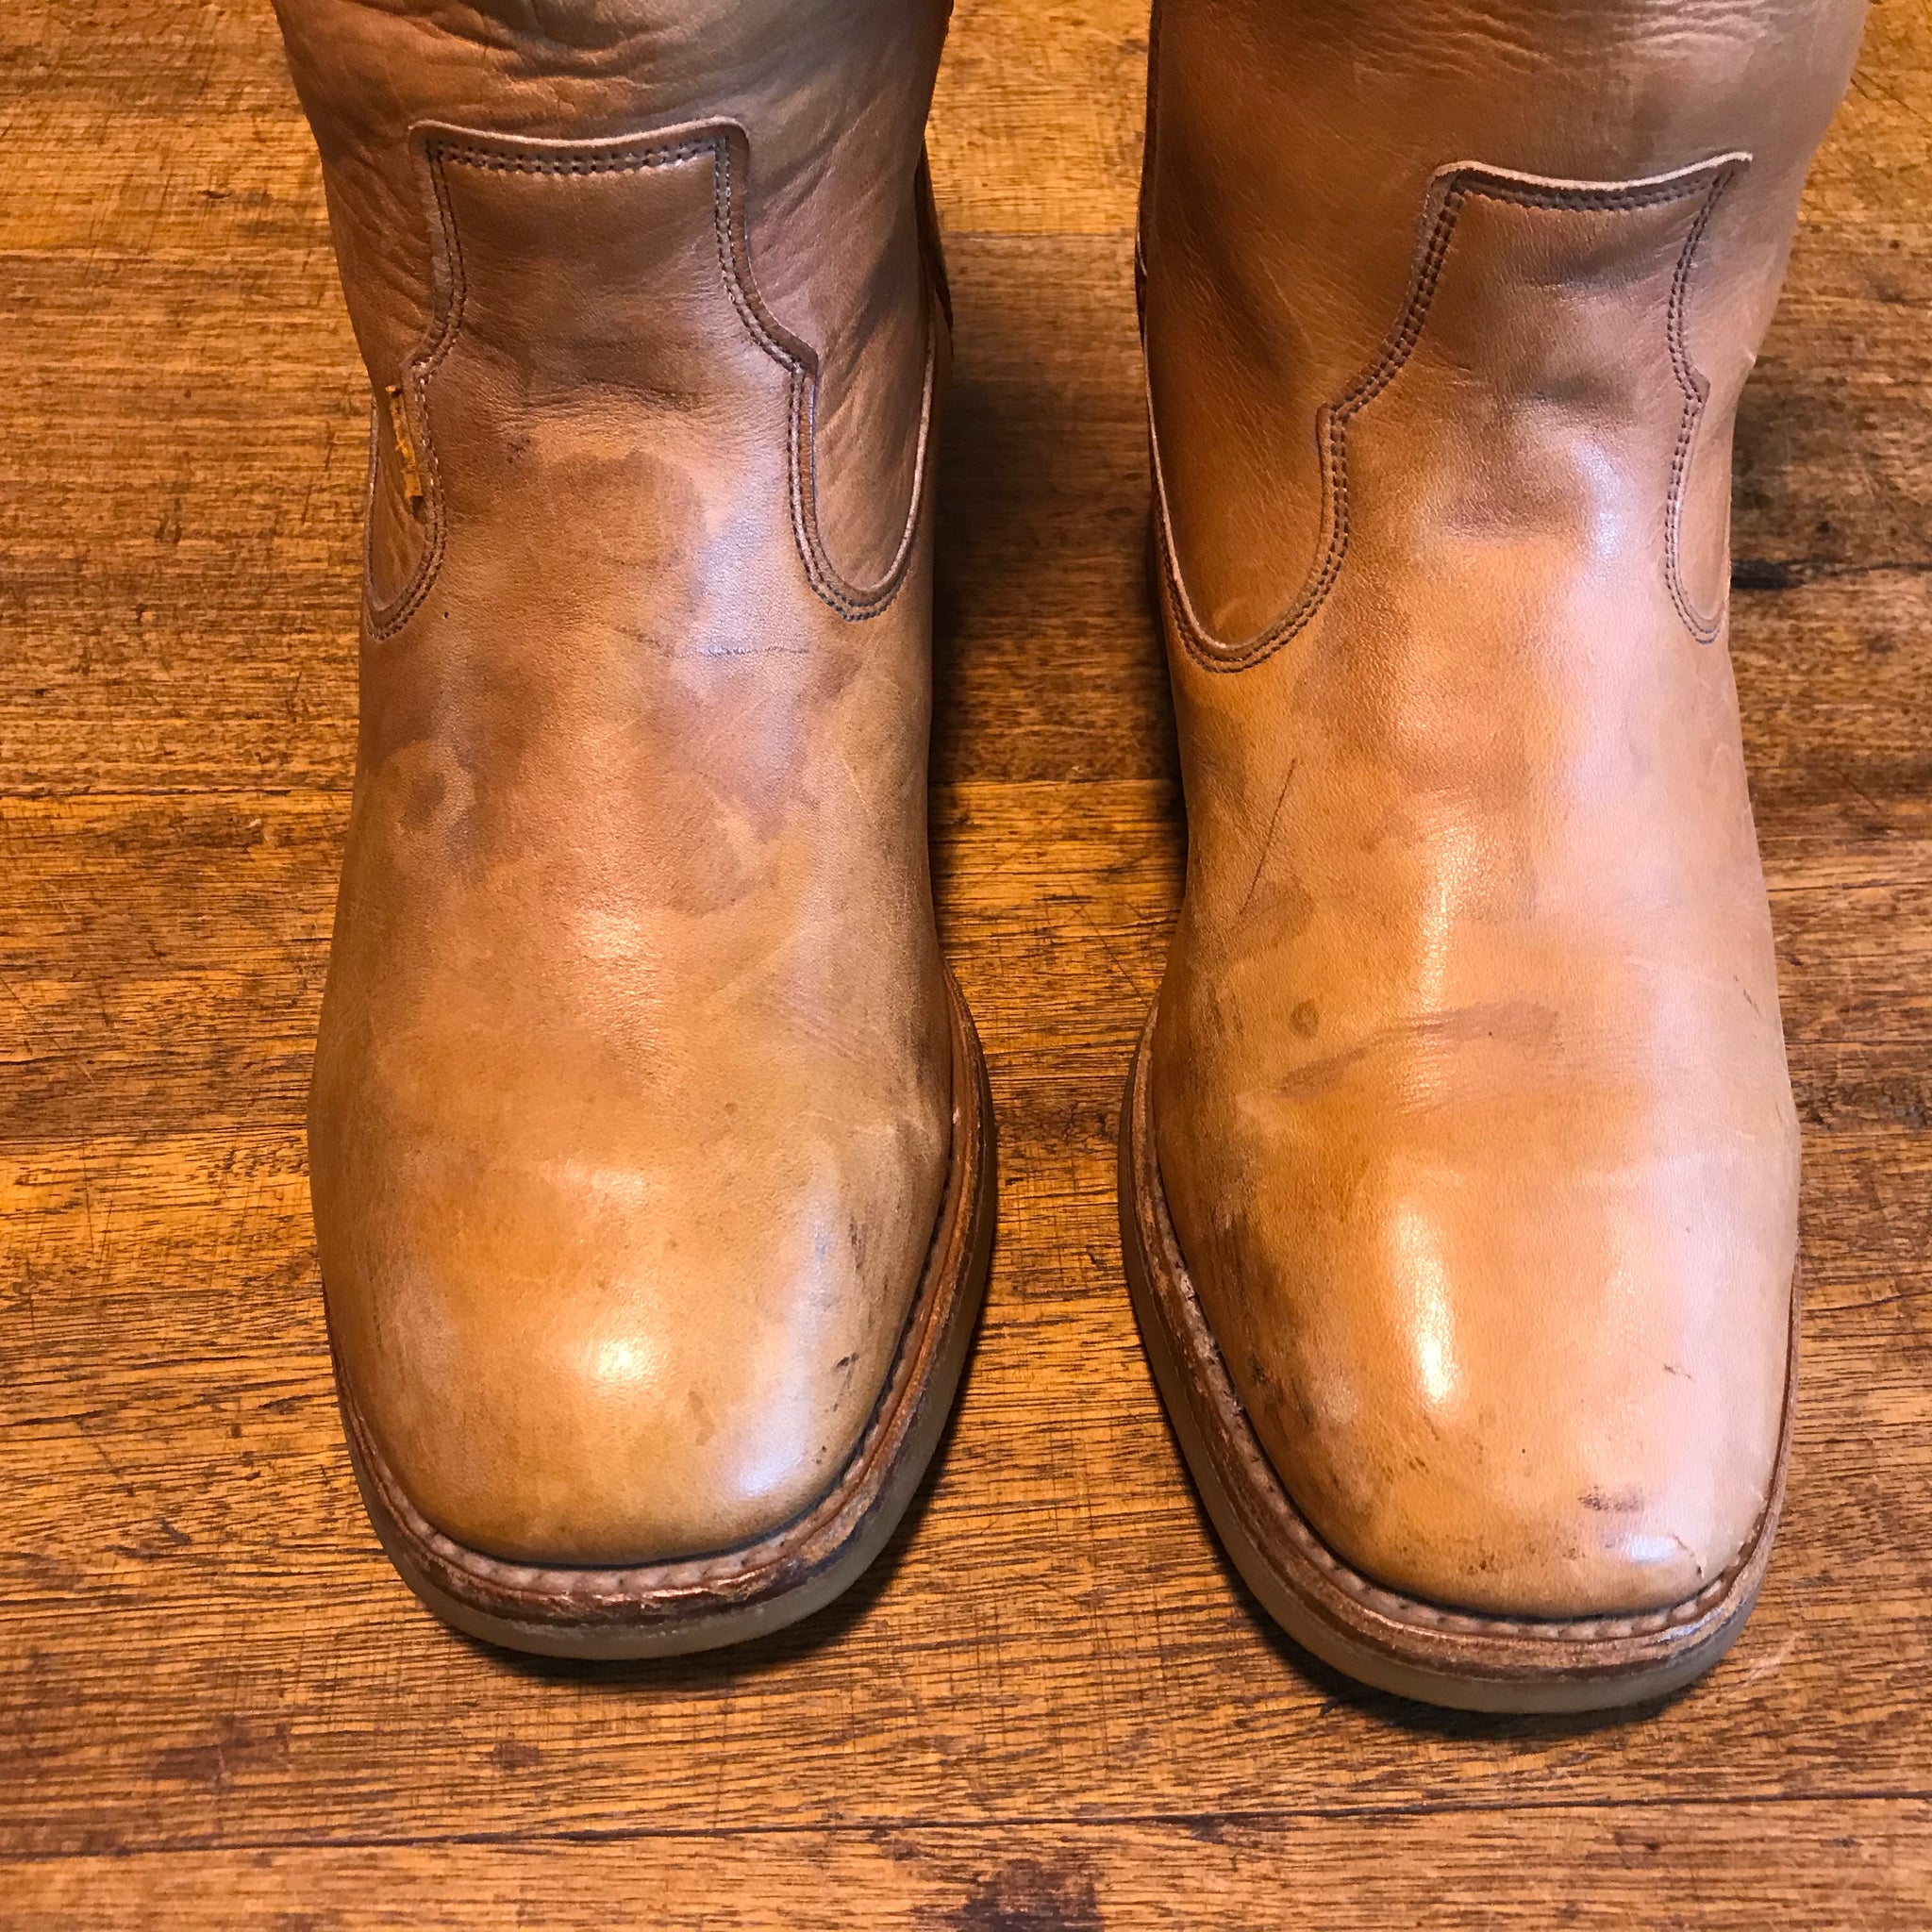 Levi’s Strauss & Co - Cowboy Boots Vintage 70/80’s Mens Leather Frye Style Boots Made in USA